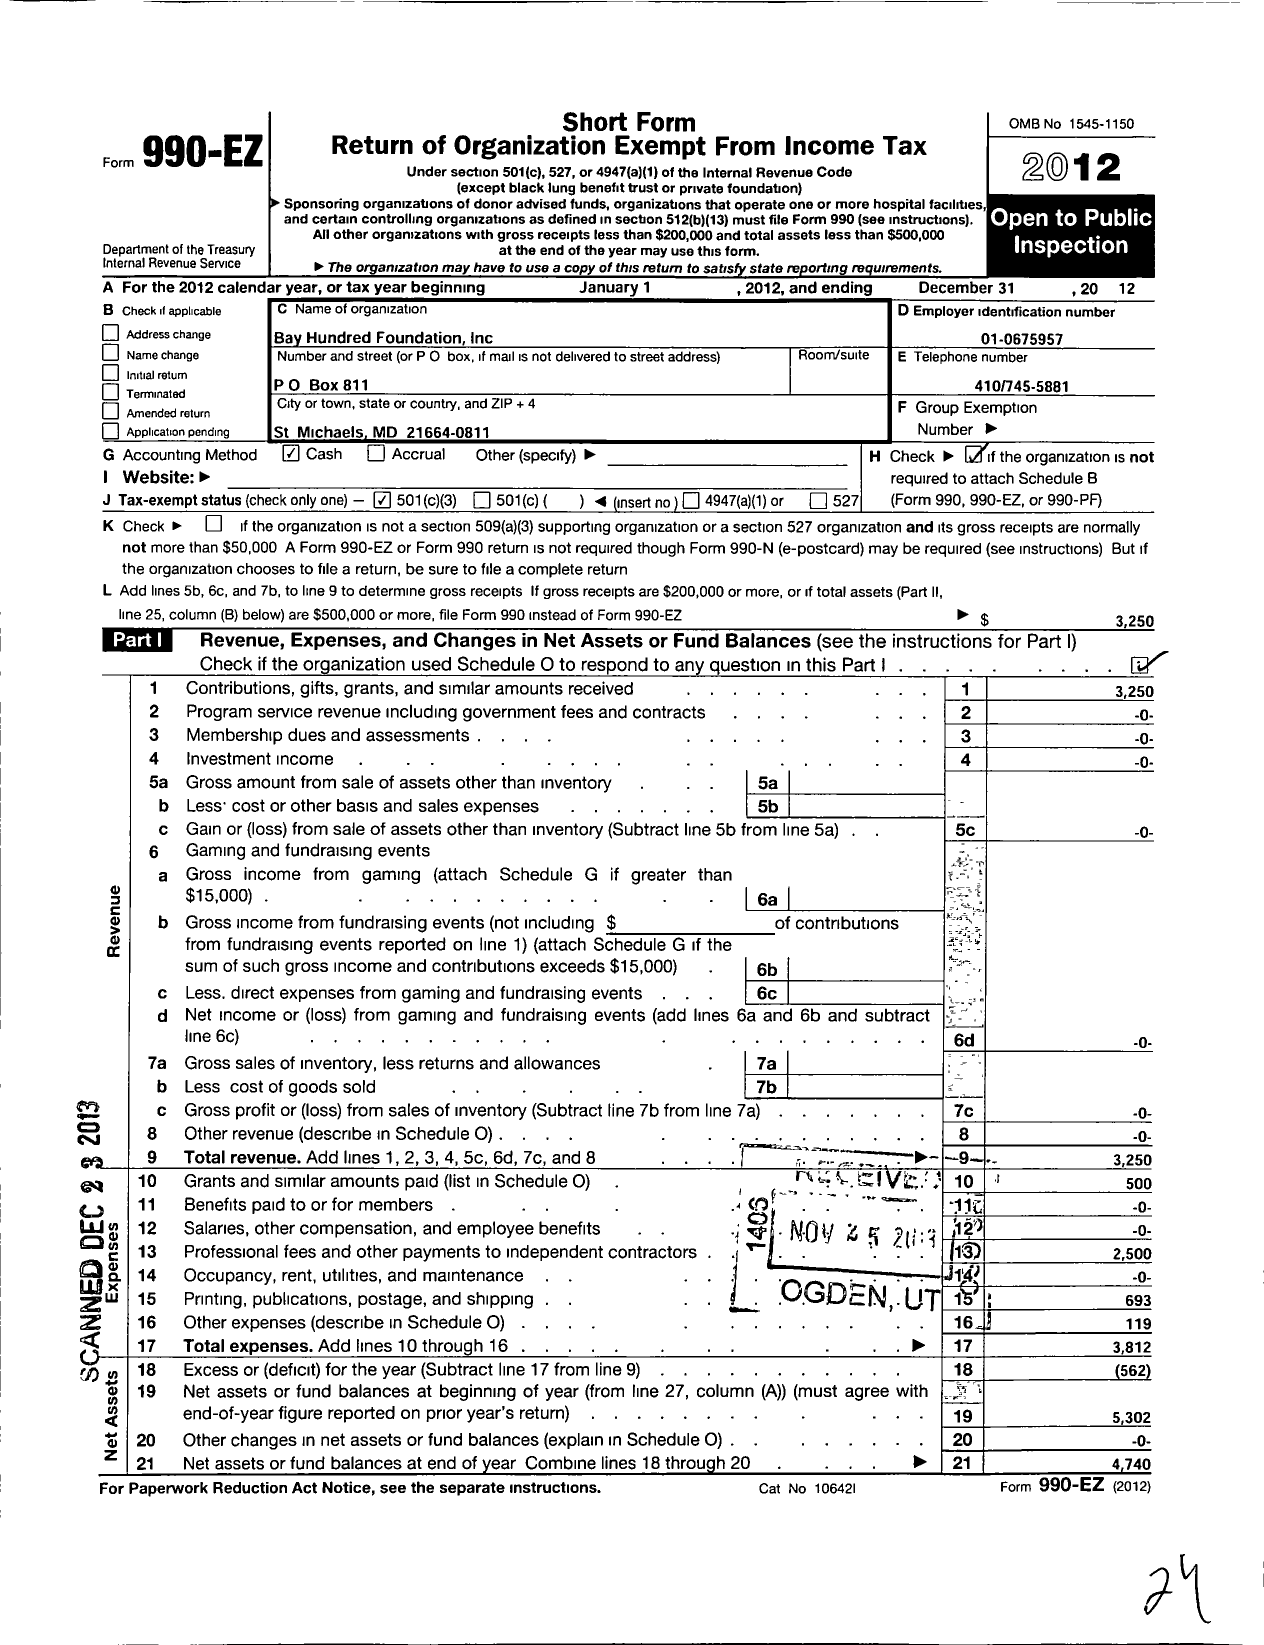 Image of first page of 2012 Form 990EZ for Bay Hundred Foundation